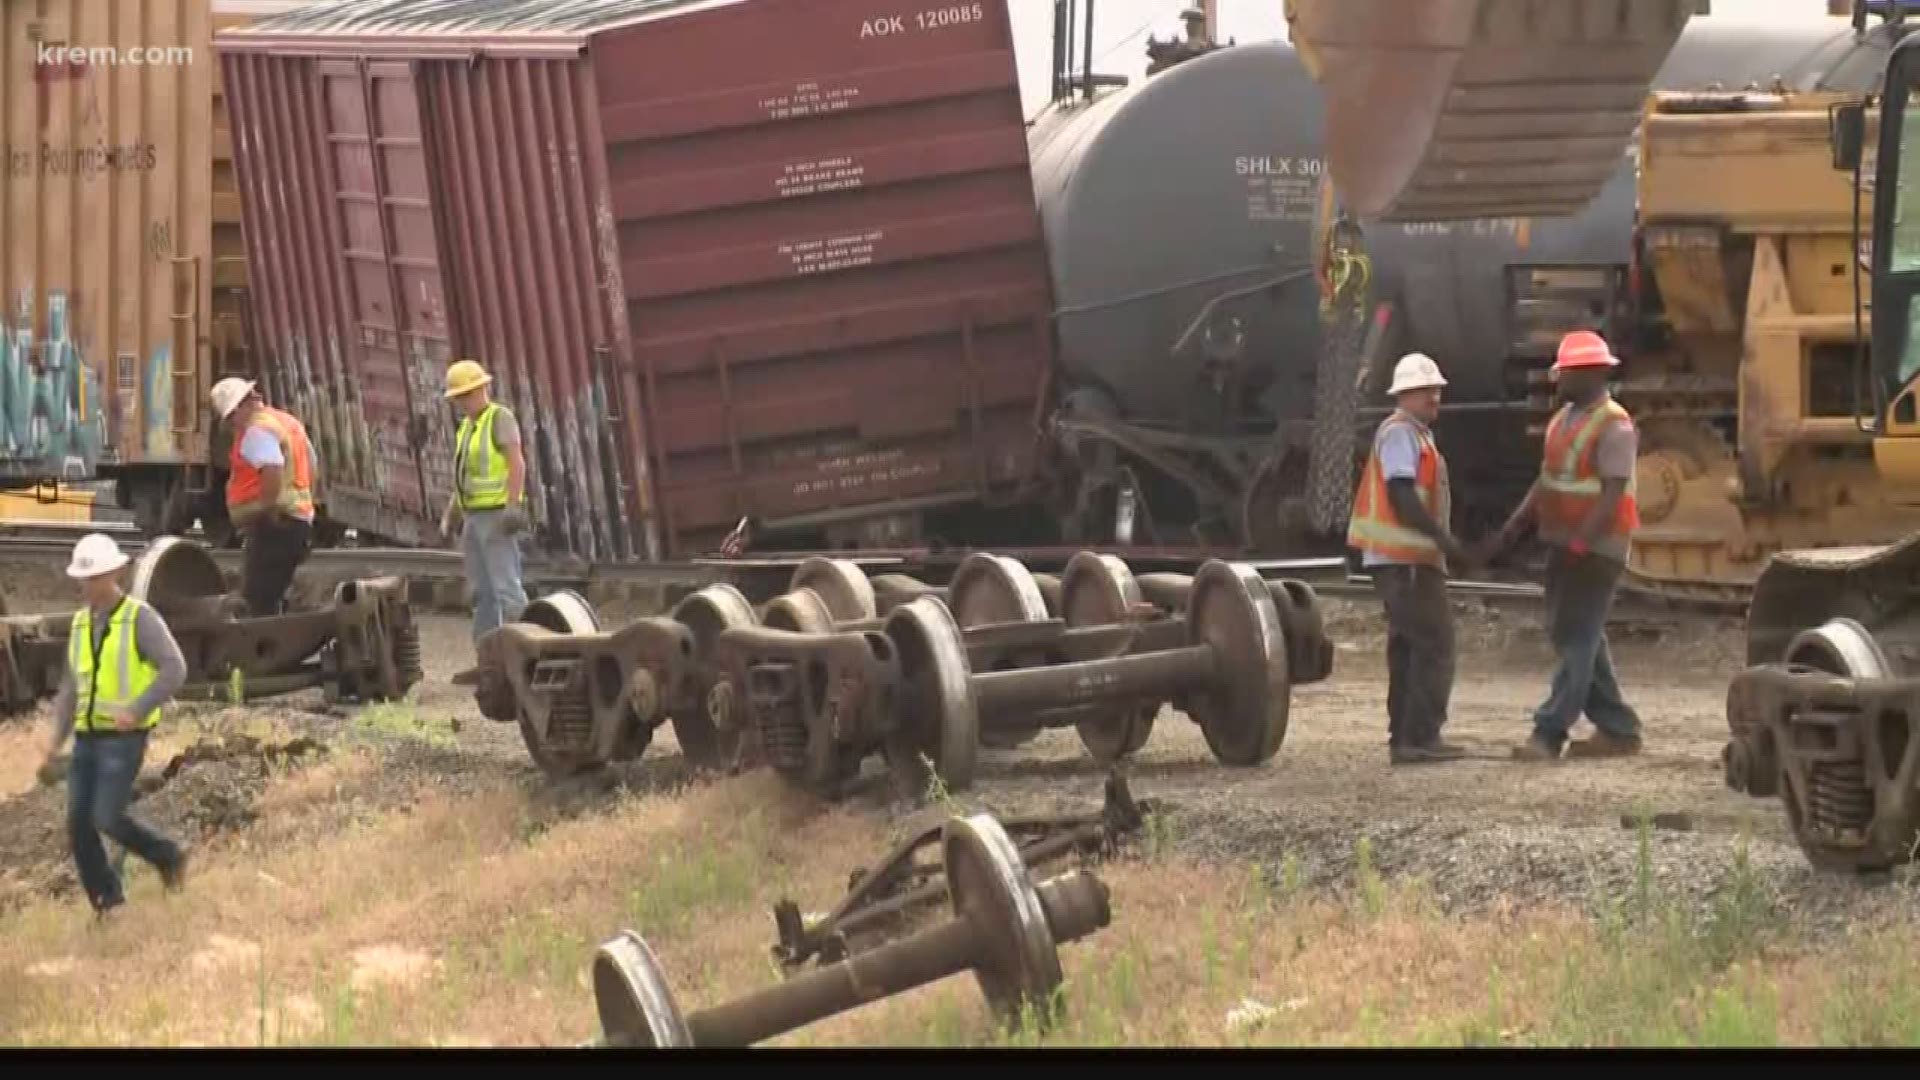 Two more Union Pacific train cars derailed in Spokane. Less than 24 hours after six train cars derailed in the same area.